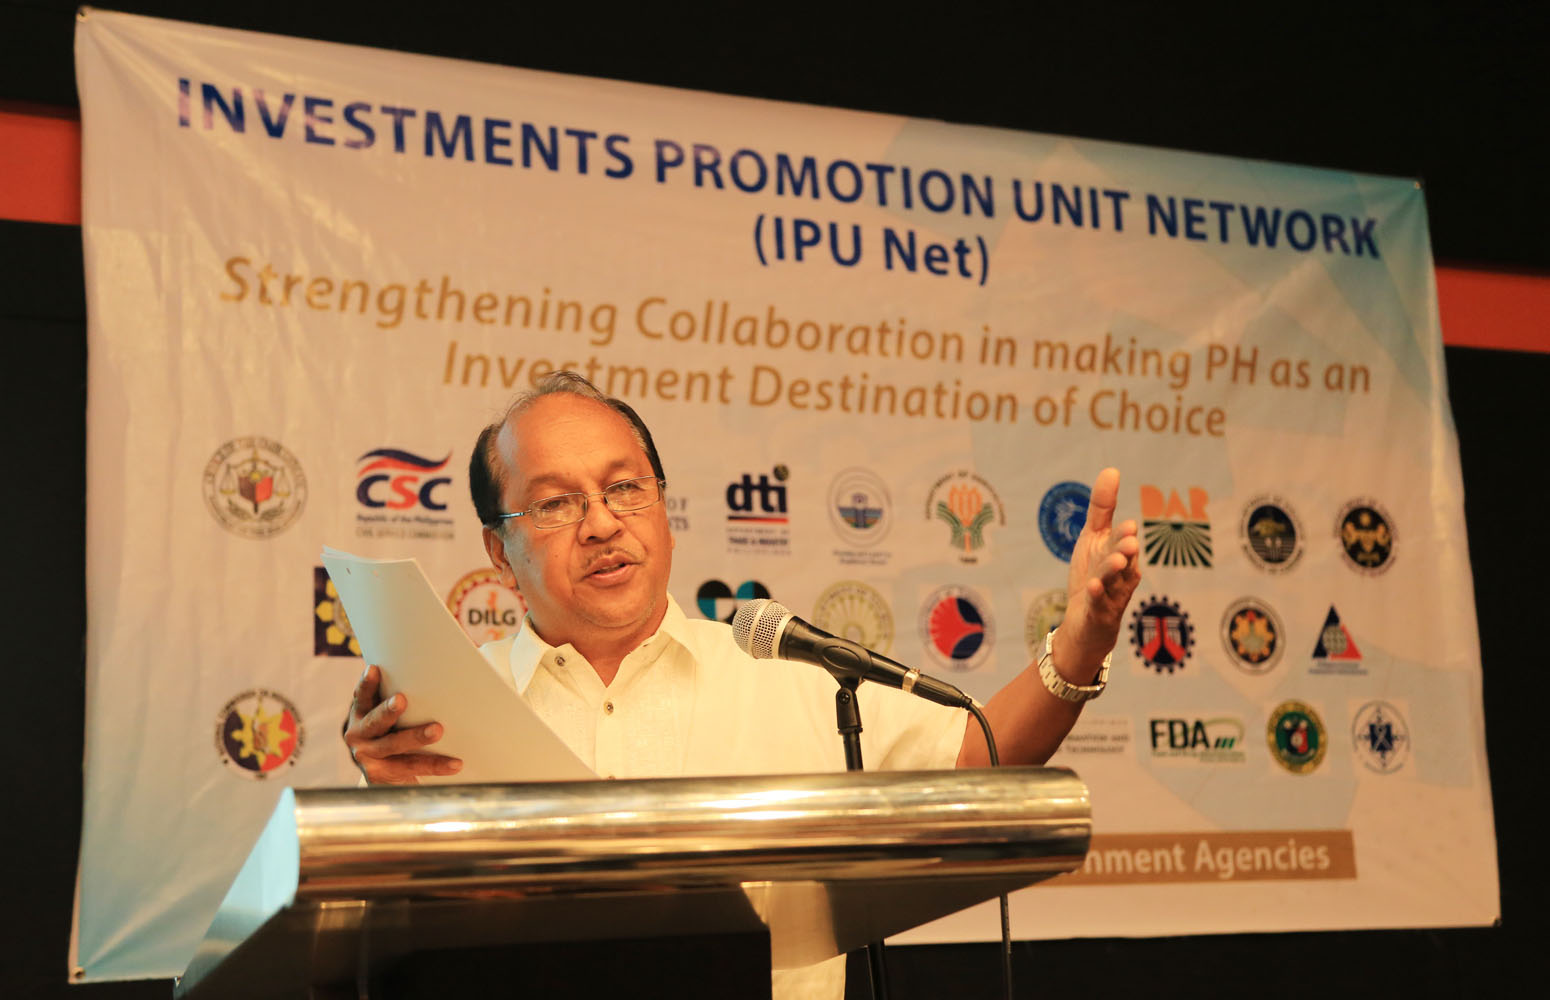 BOI Director for Investments Assistance Domingo Bagaporo emphasized the importance of strengthening collaboration among Investments Promotion Units to hasten facilitation of investment concerns of prospective and existing businessmen.